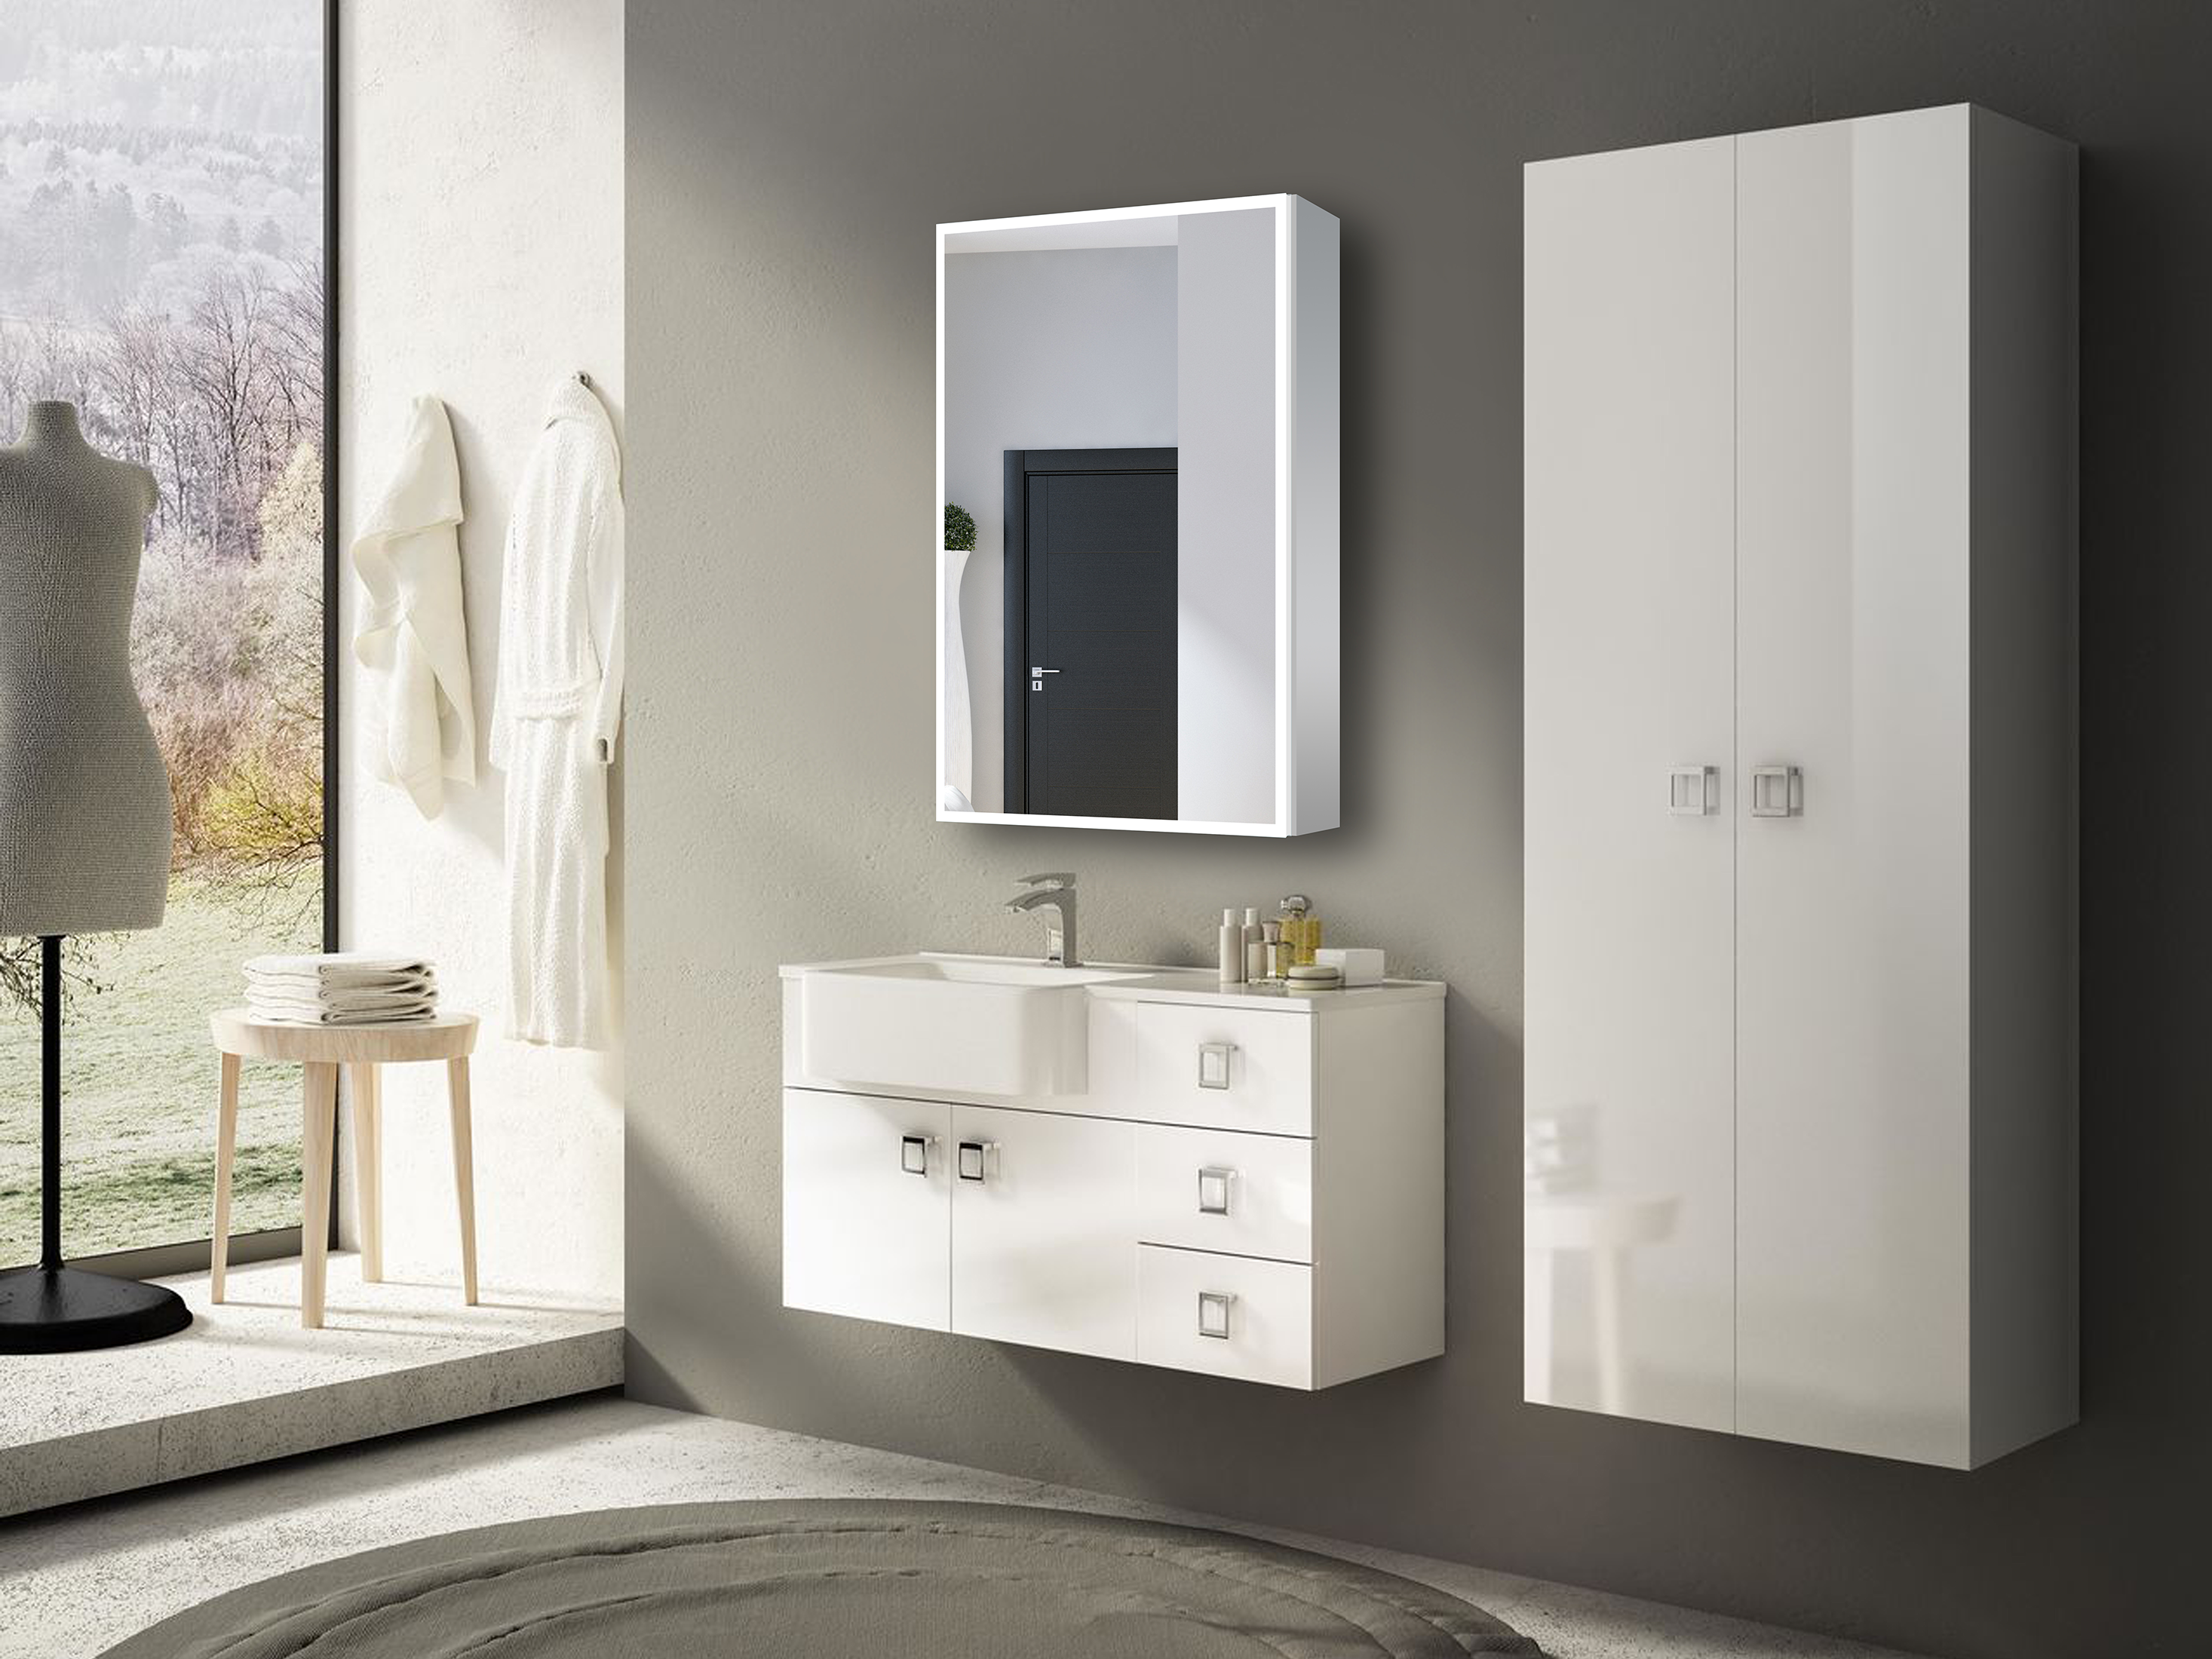 Dhalia LED Bathroom Medicine Cabinet with Defogger and Internal 3X Makeup Mirror - Available in 5 Sizes - Dreamwerks